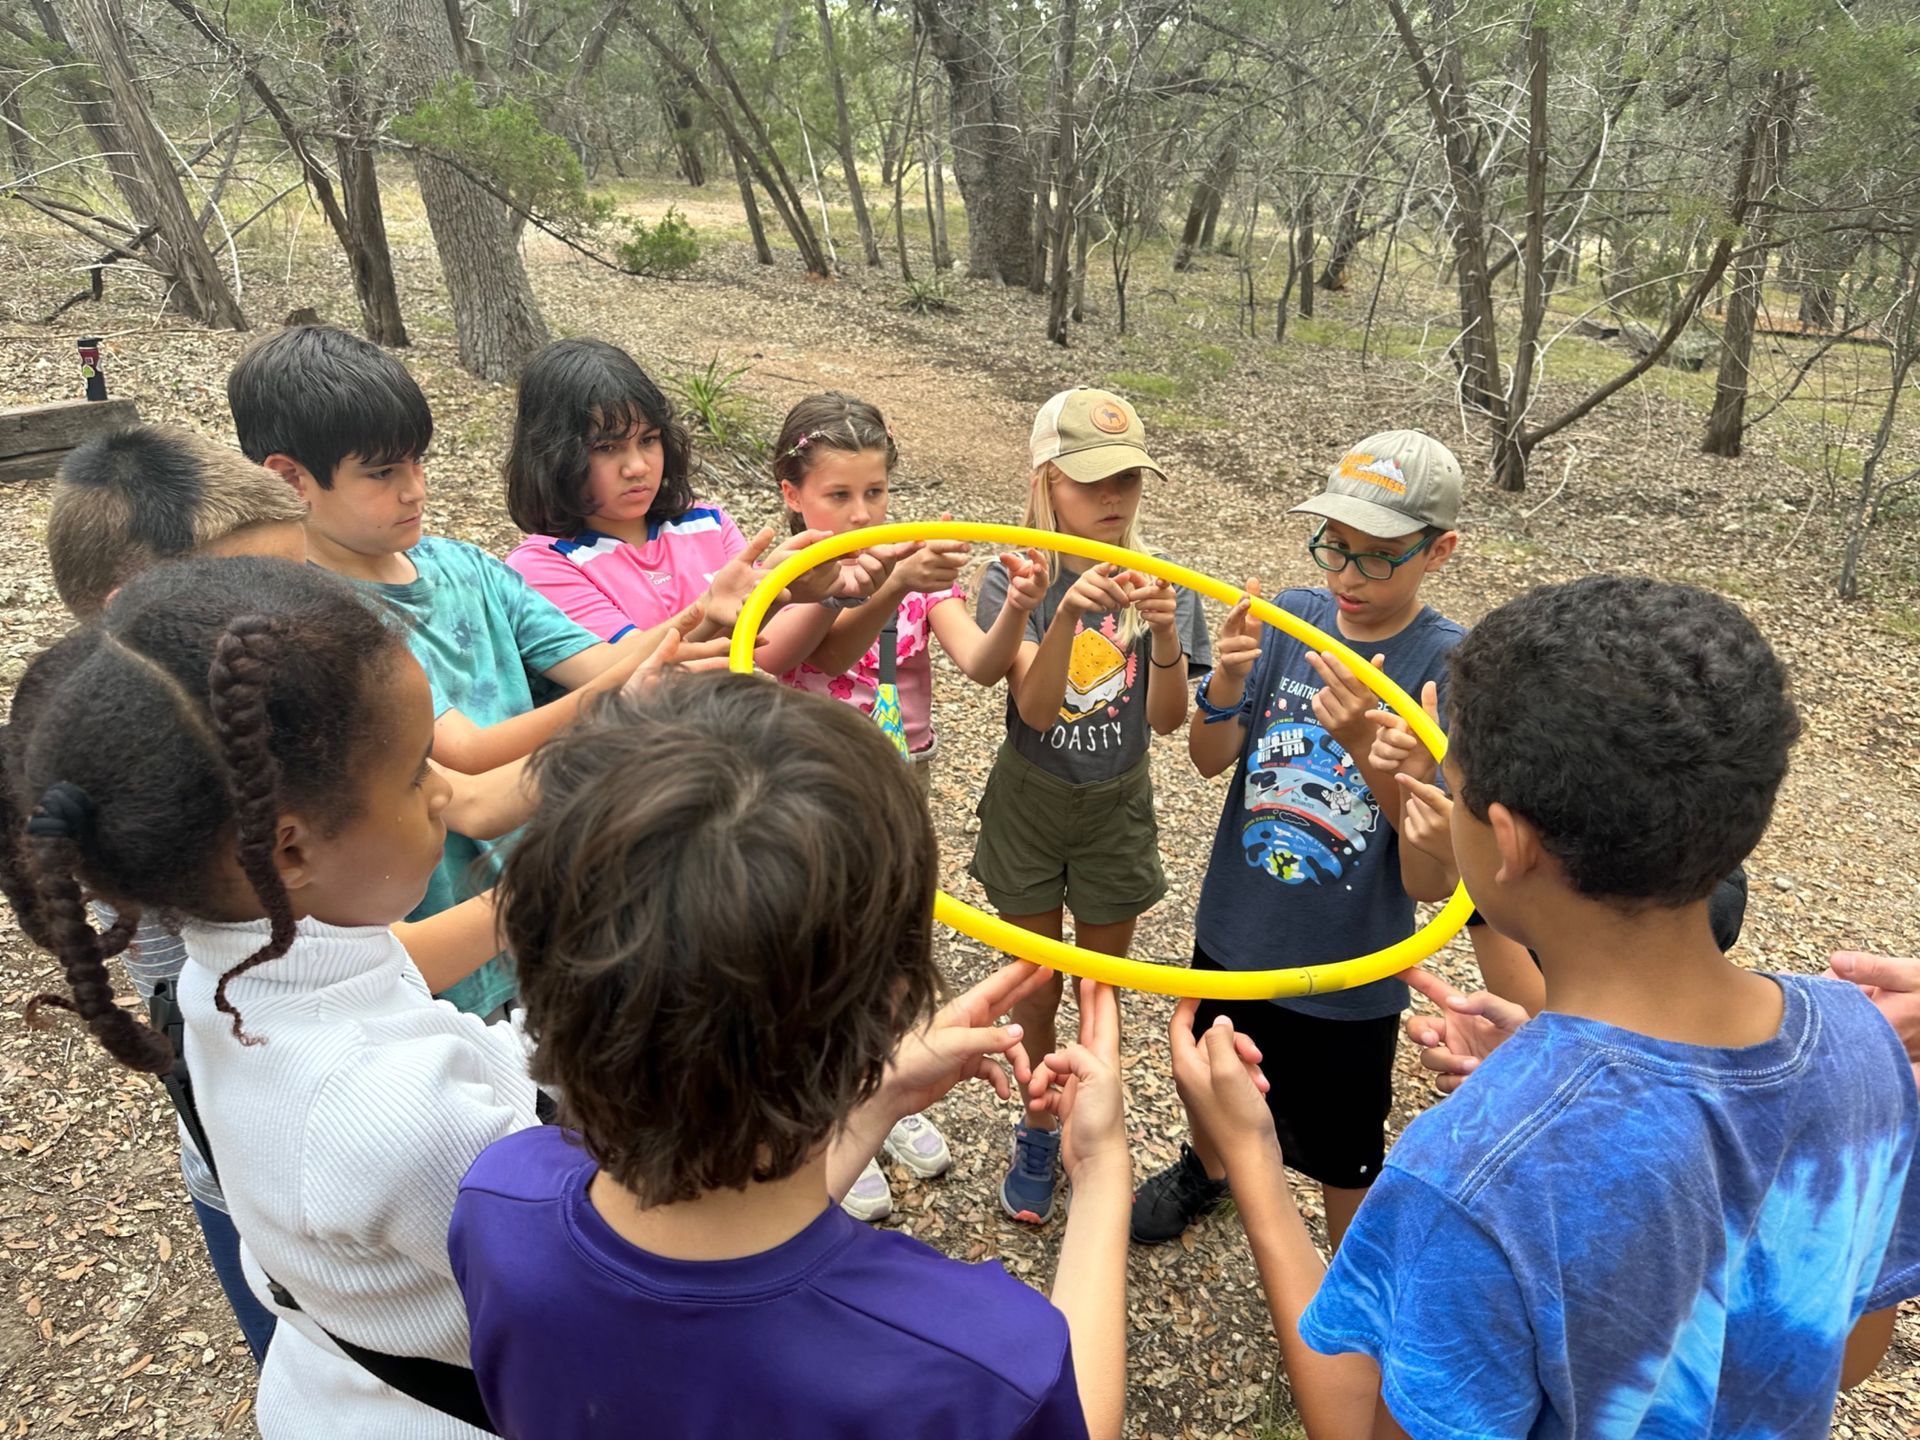 A group of Montessori children are holding a yellow hoop in a circle